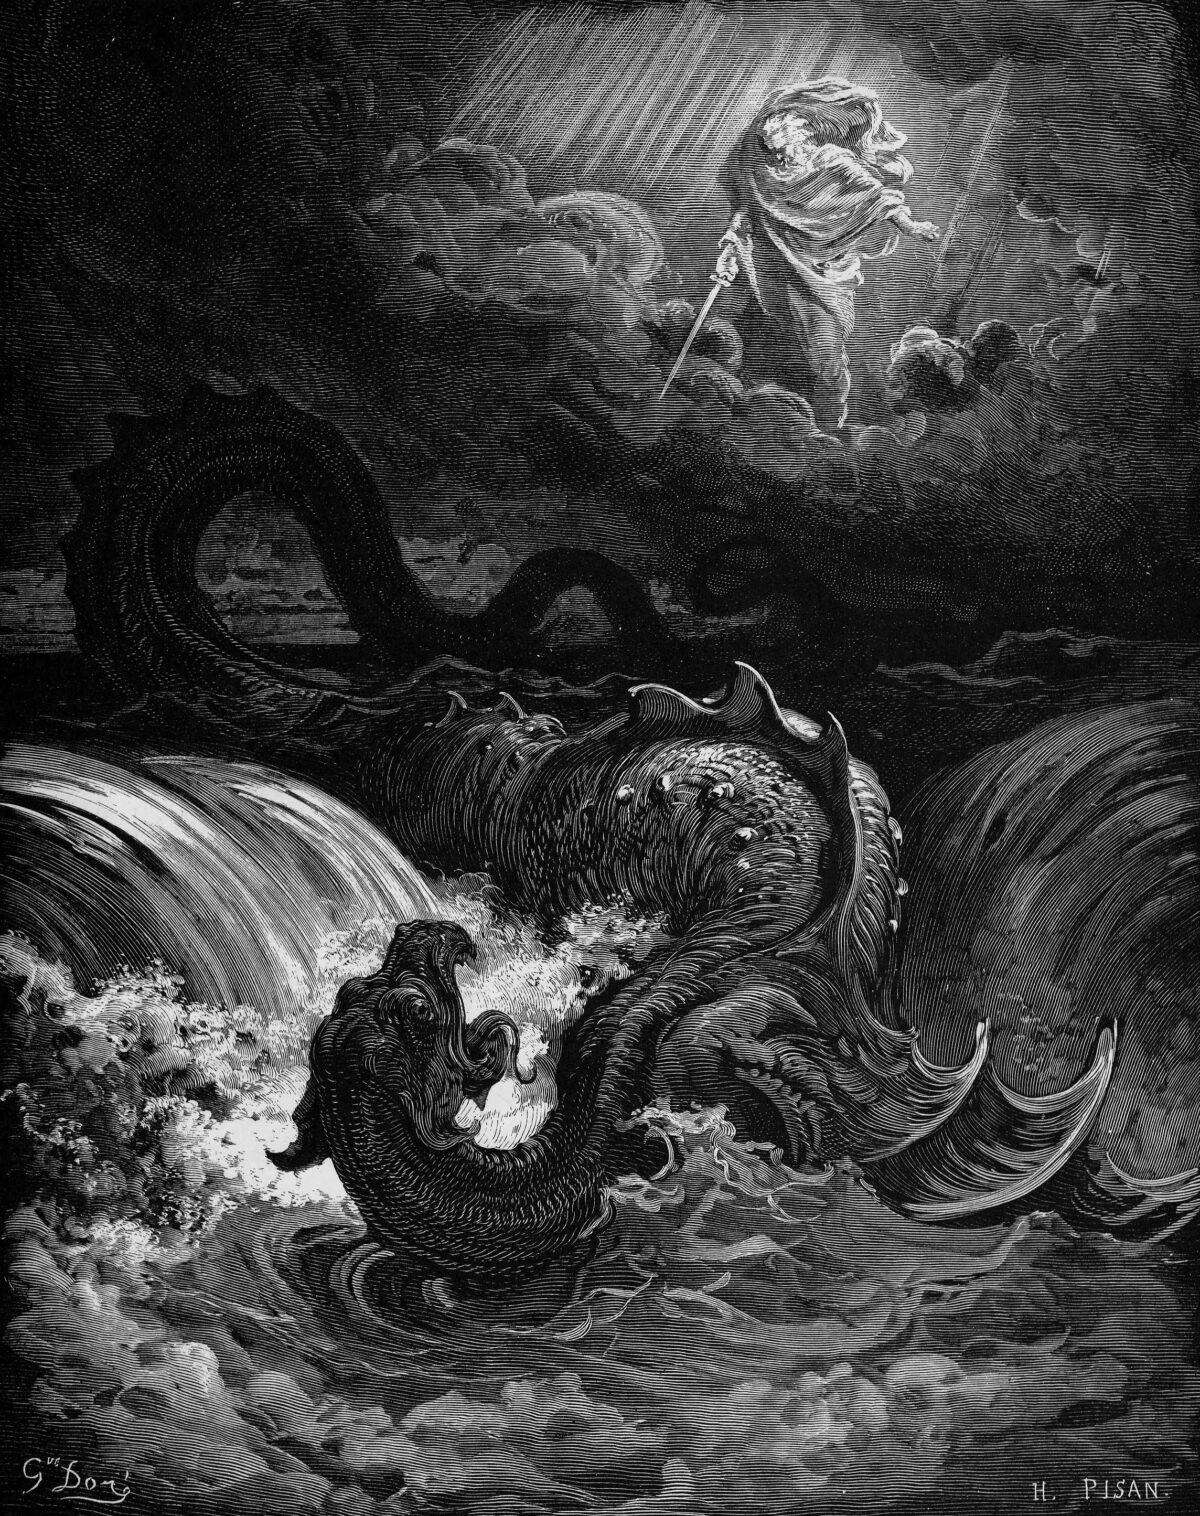 Etching from “Destruction of Leviathan” by Gustave Doré (1865; public domain via Wikimedia Commons). The etching depicts the Our Lord slaying the Leviathan as described in Isaiah 27:1.